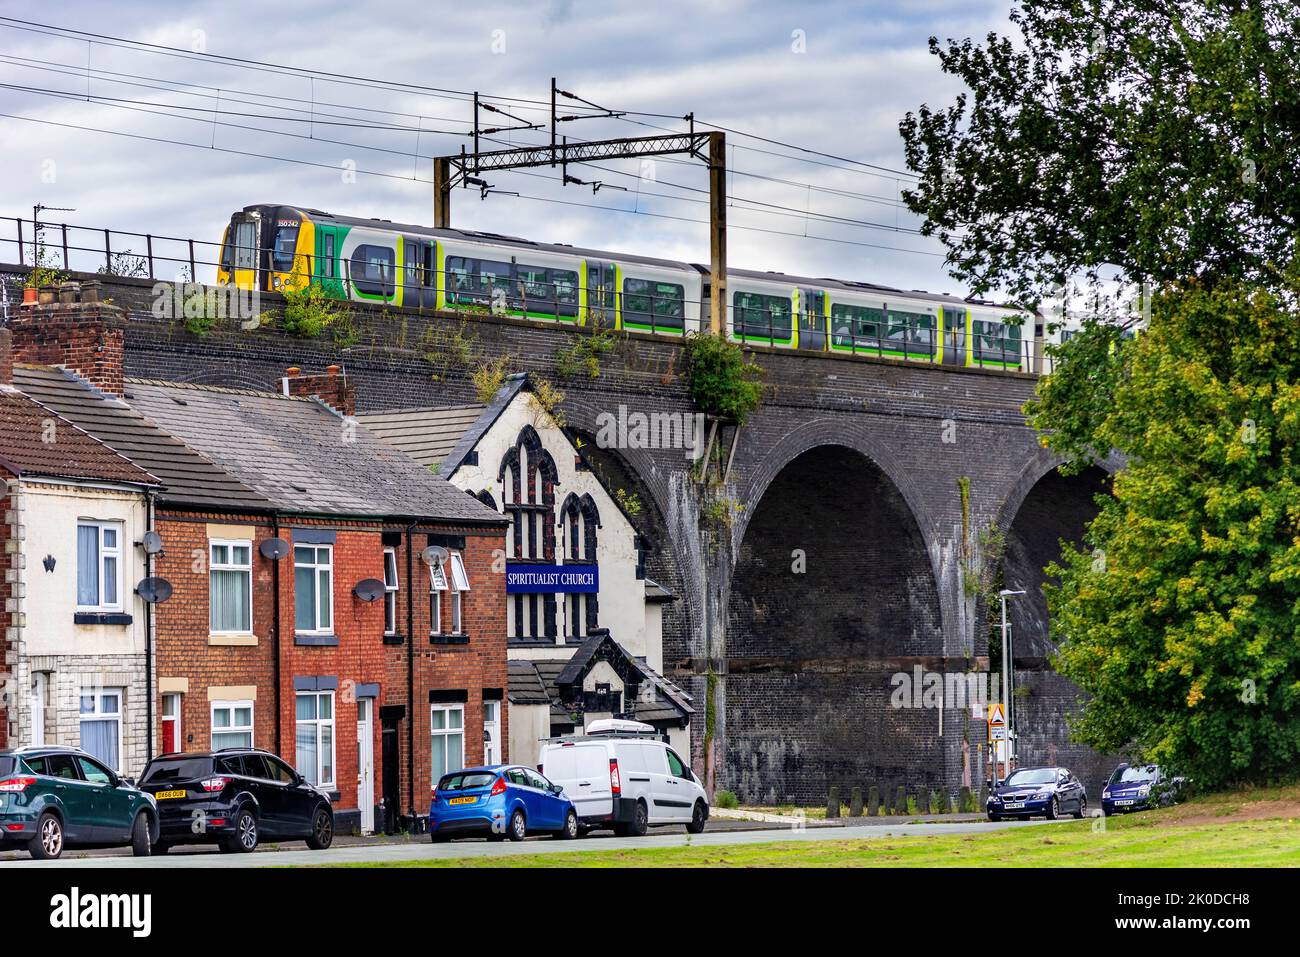 London and North Western railway Class 350 electric multiple unit train heads towards Liverpool passing over houses under bridge arches. Stock Photo